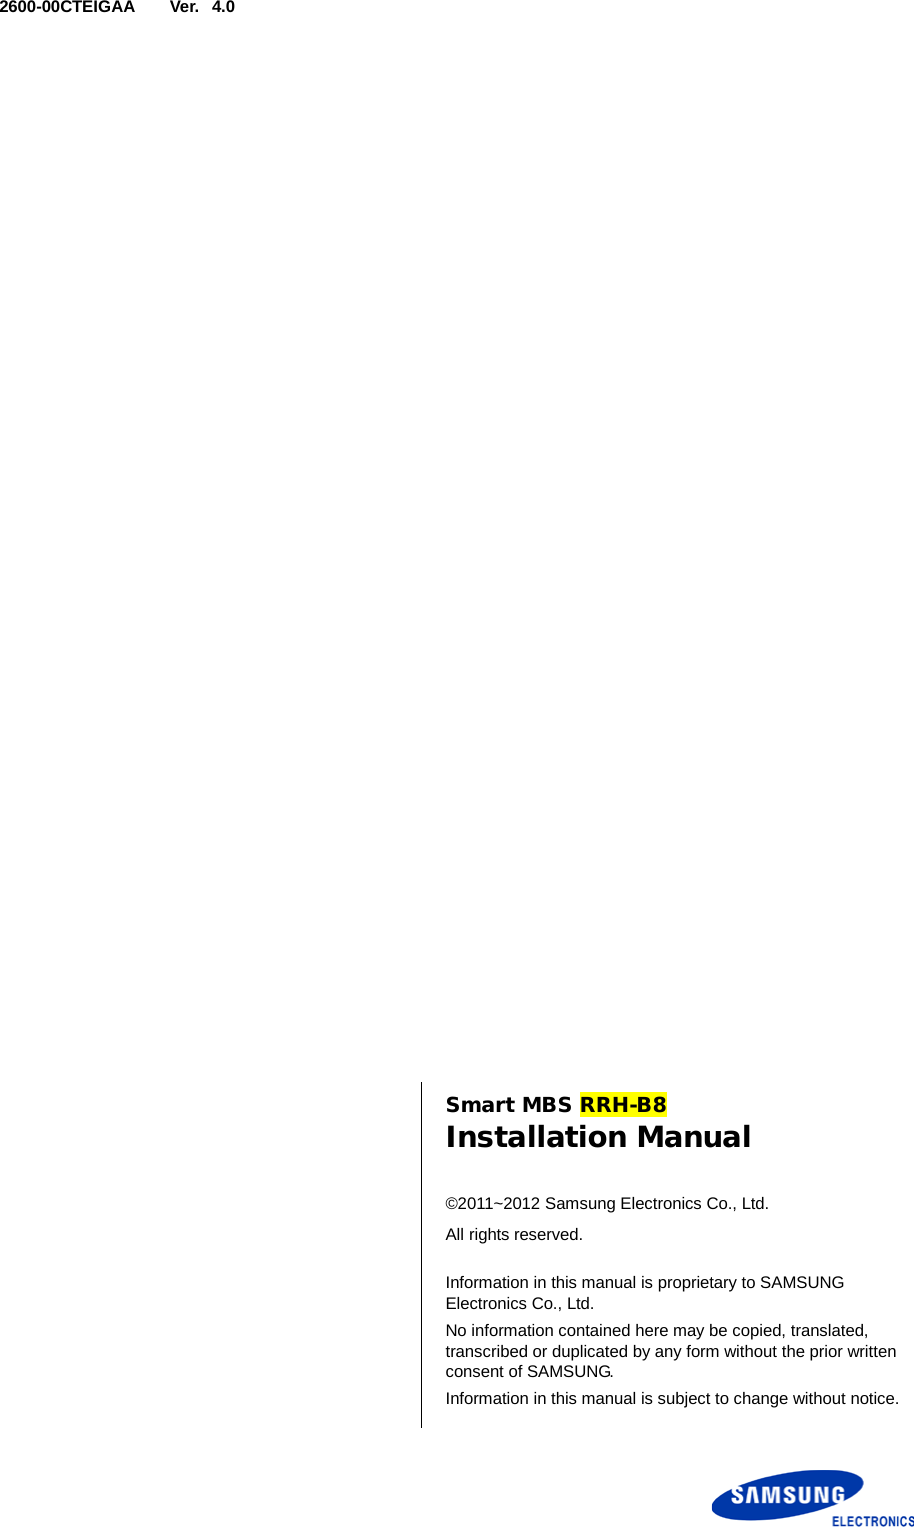  Ver.   2600-00CTEIGAA 4.0      Smart MBS RRH-B8 Installation Manual  ©2011~2012 Samsung Electronics Co., Ltd. All rights reserved.  Information in this manual is proprietary to SAMSUNG Electronics Co., Ltd. No information contained here may be copied, translated, transcribed or duplicated by any form without the prior written consent of SAMSUNG. Information in this manual is subject to change without notice.  